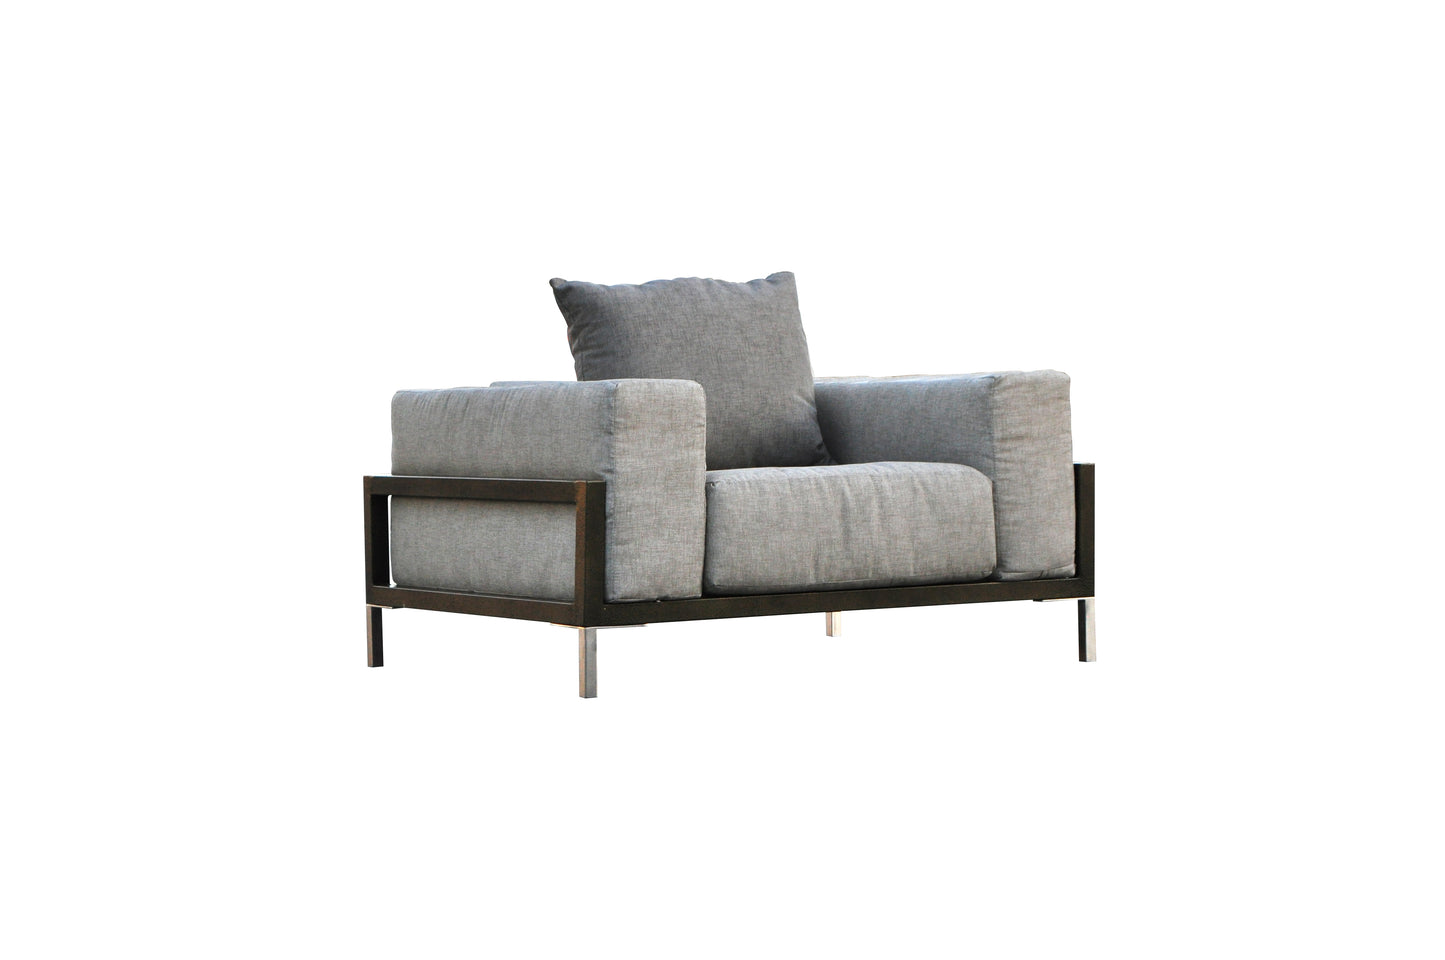 Nubis Outdoor 3-Piece Sofa, Loveseat, and Chair Set